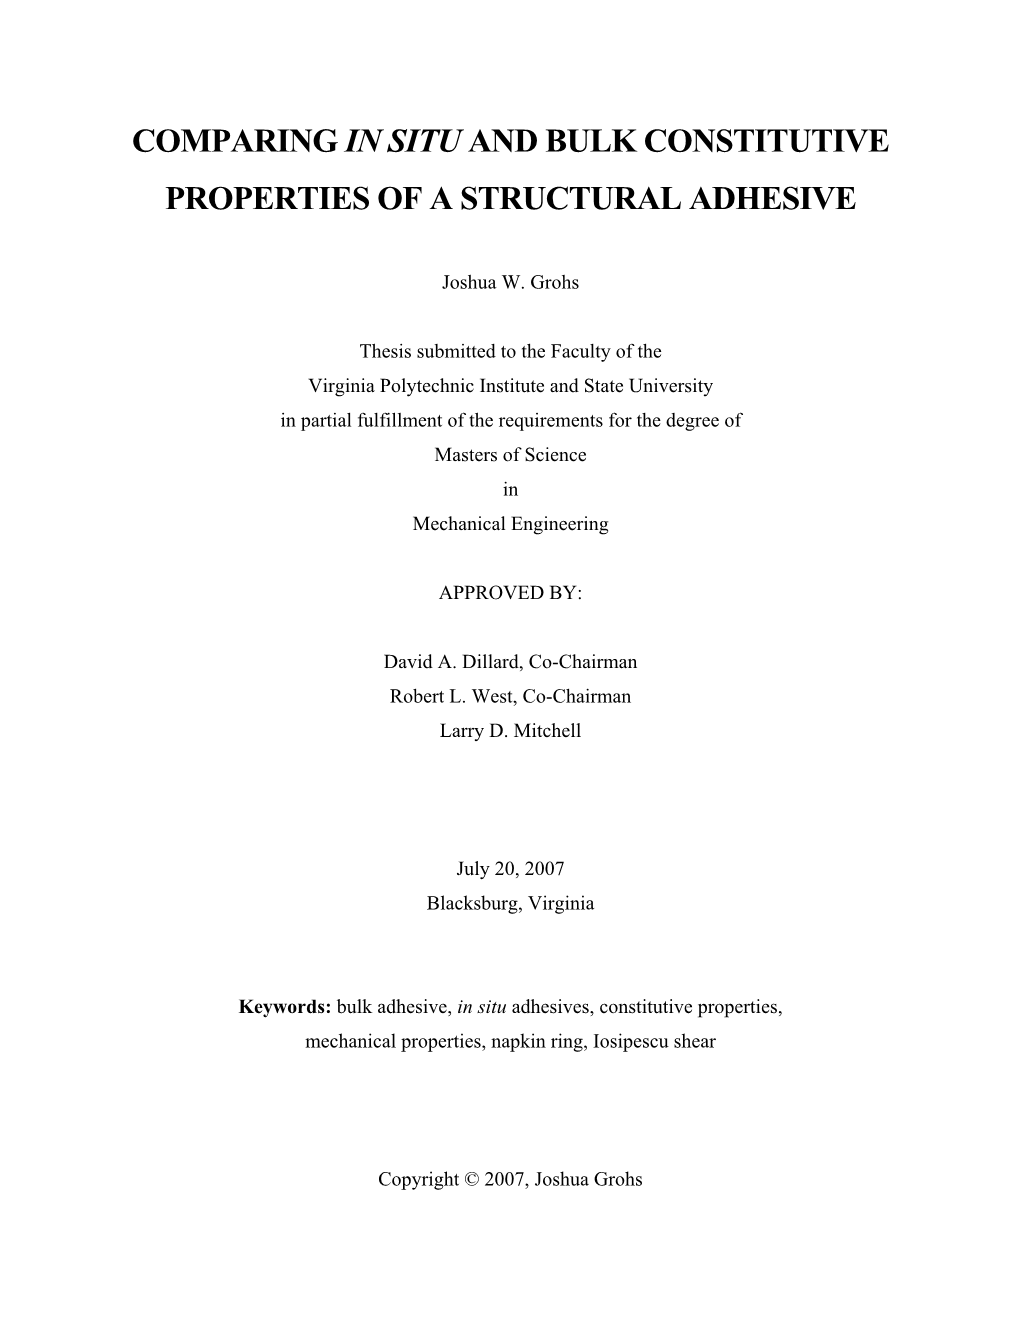 Comparing in Situ and Bulk Constitutive Properties of a Structural Adhesive